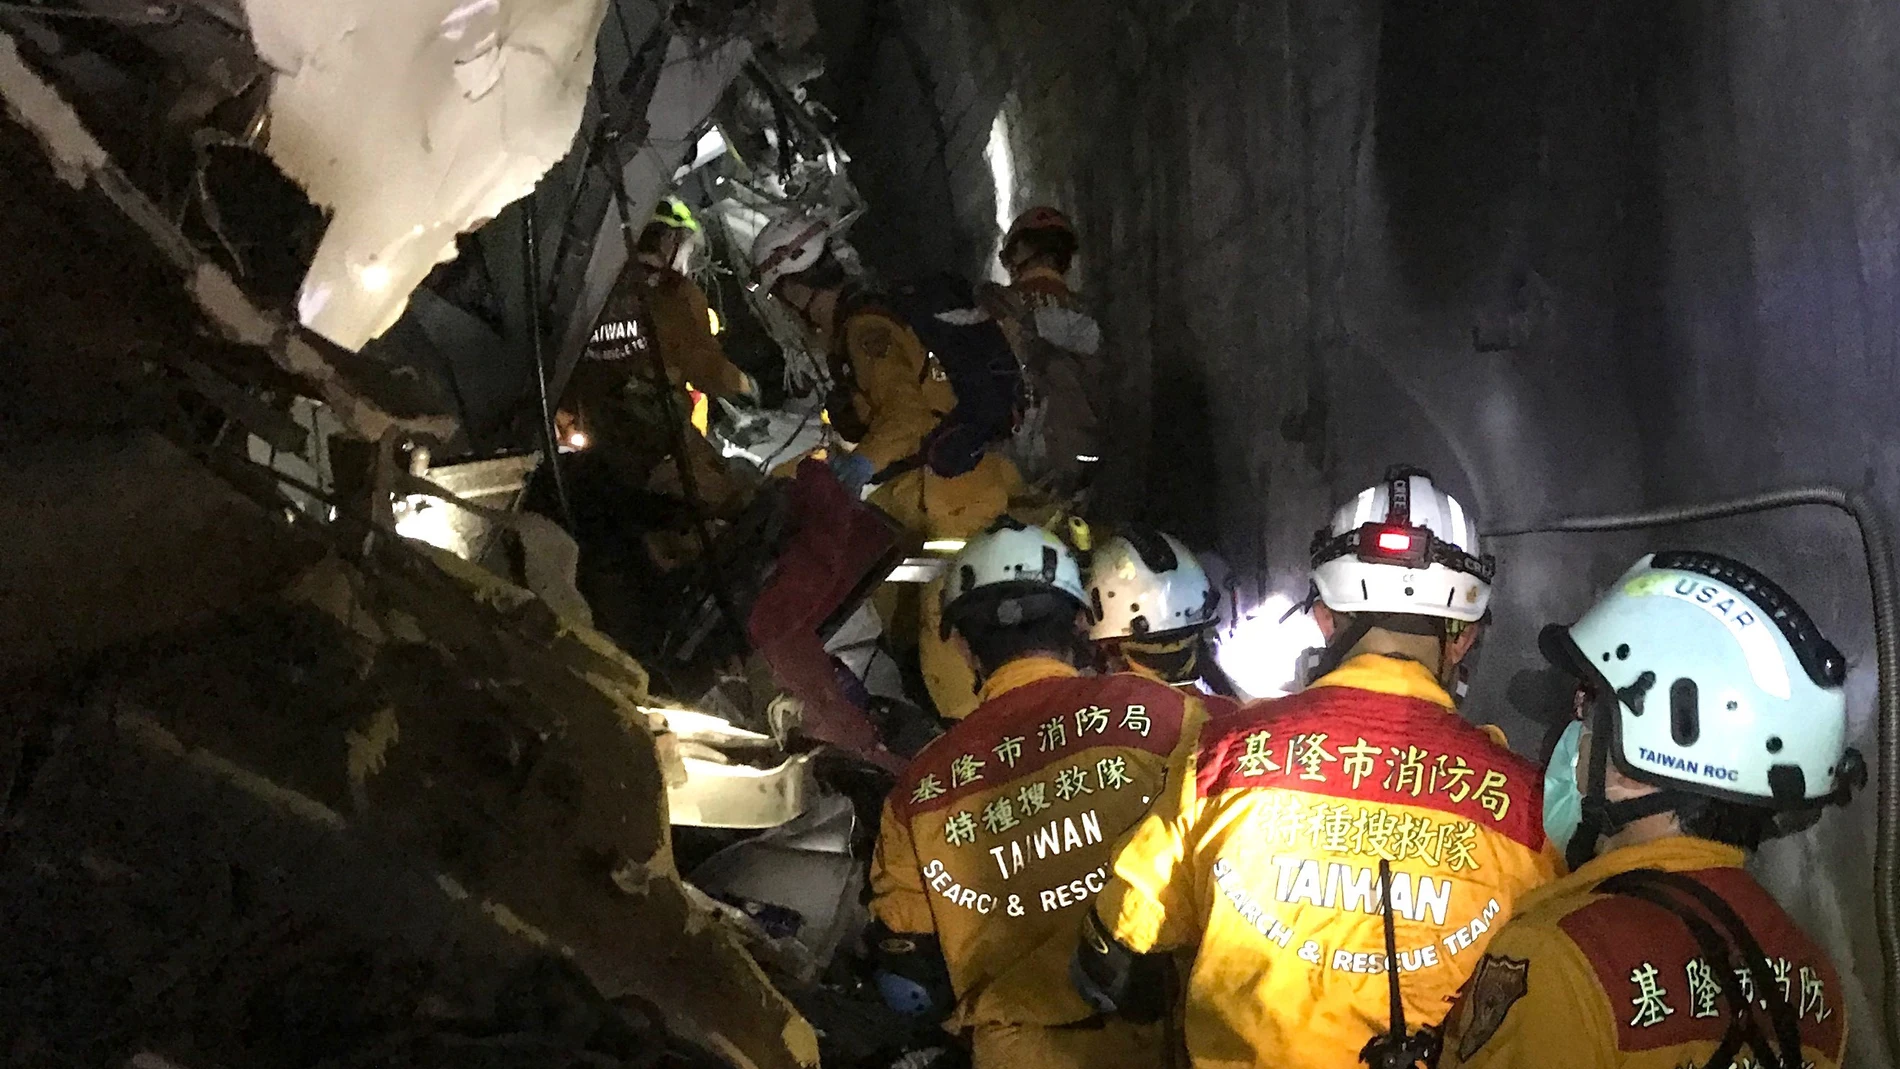 02 April 2021, Taiwan, Hualien: Rescue members of the Keelung City Fire Department search for people who are stranded and injured in compartments after a train carrying 490 people derailed in a tunnel north of Hualien, Taiwan. At least 66 were injured and 48 others were killed, according to Taiwan's National Fire Agency. Photo: Keelung City Fire Department/ZUMA Wire/dpaKeelung City Fire Department/ZUM / DPA02/04/2021 ONLY FOR USE IN SPAIN